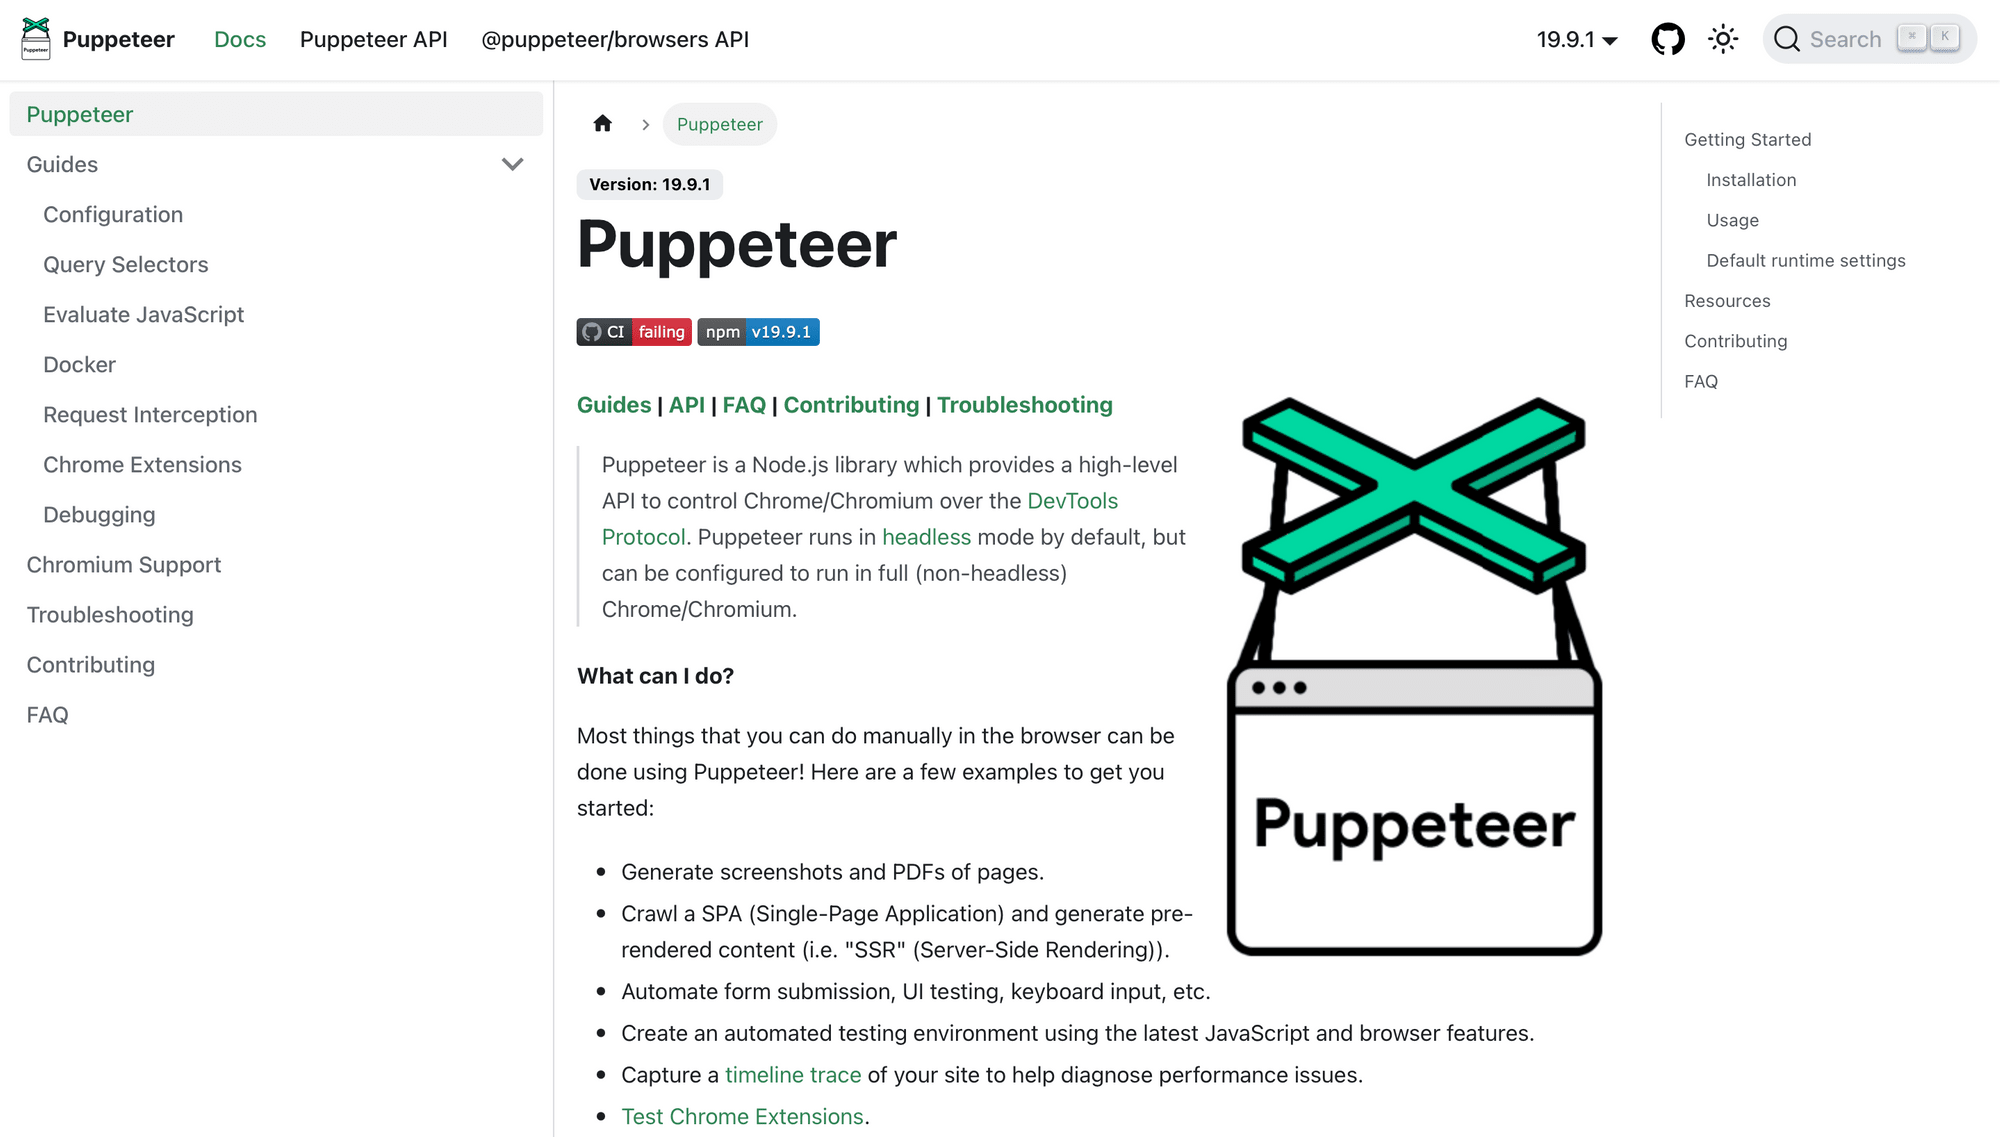 Screenshot of Puppeteer home page